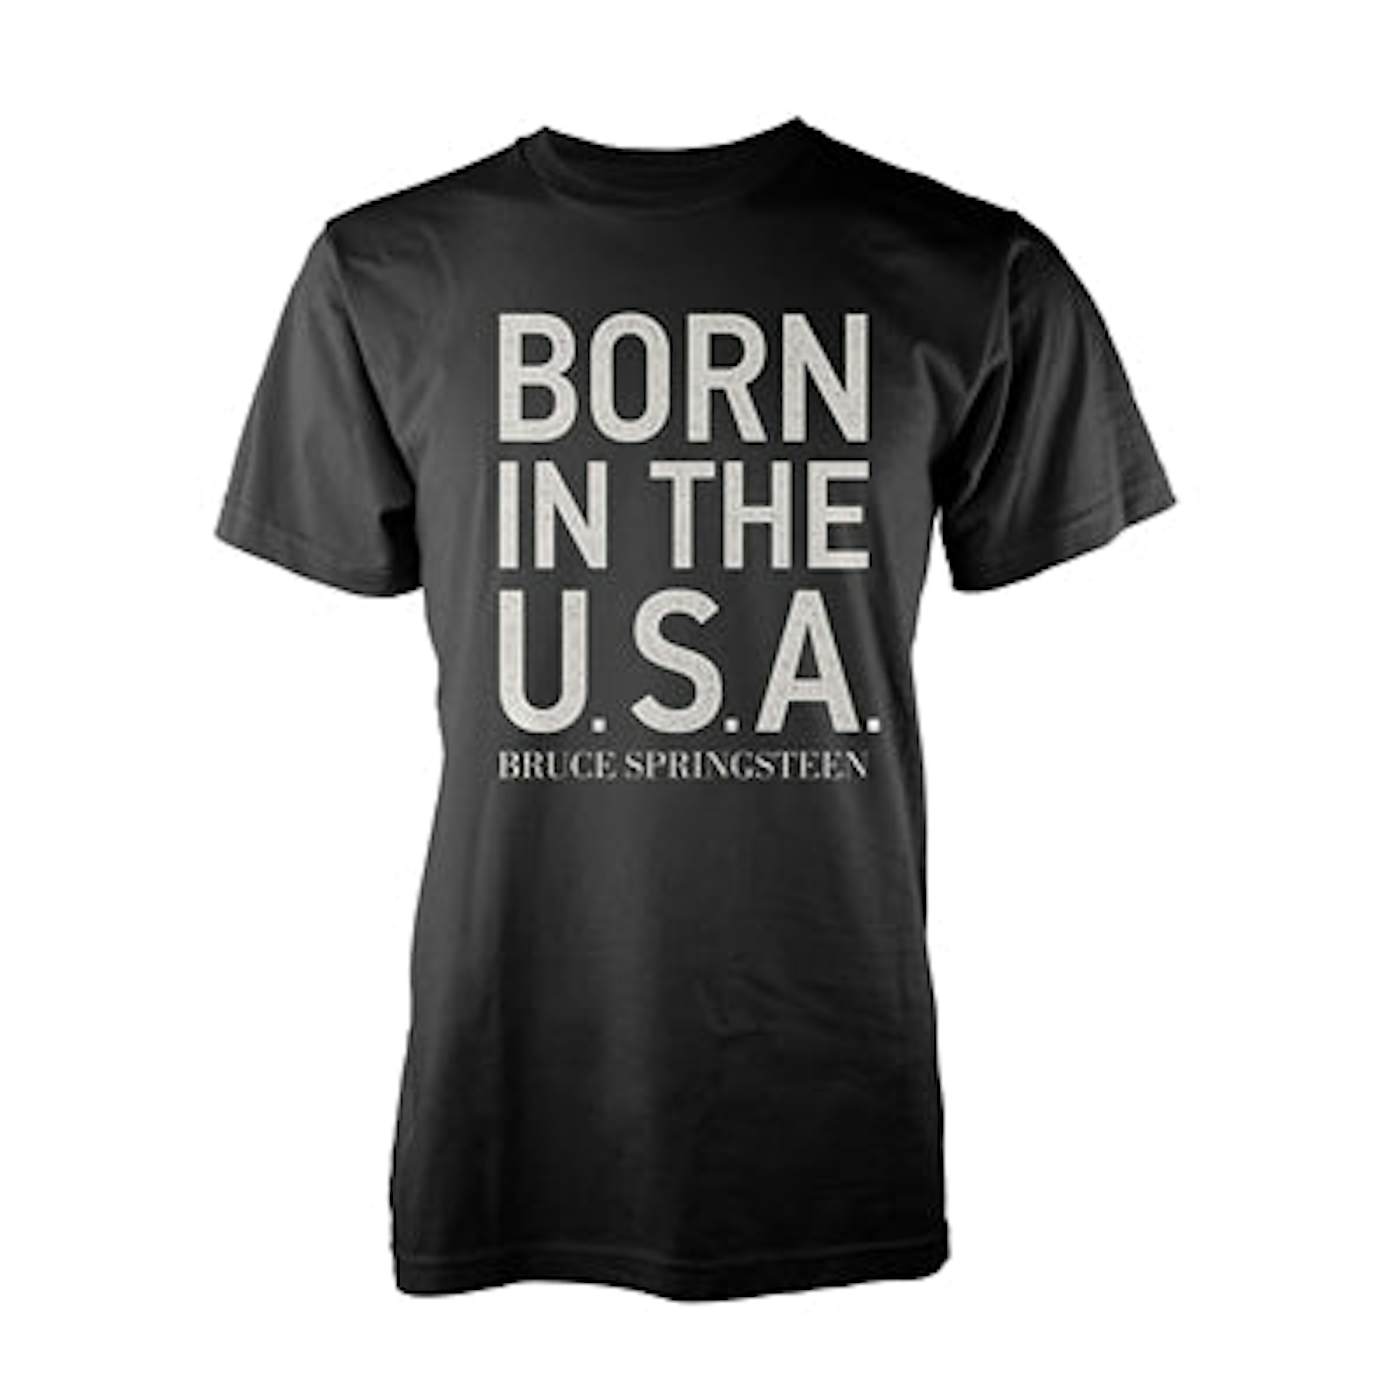 Bruce Springsteen T Shirt - Born In The USA